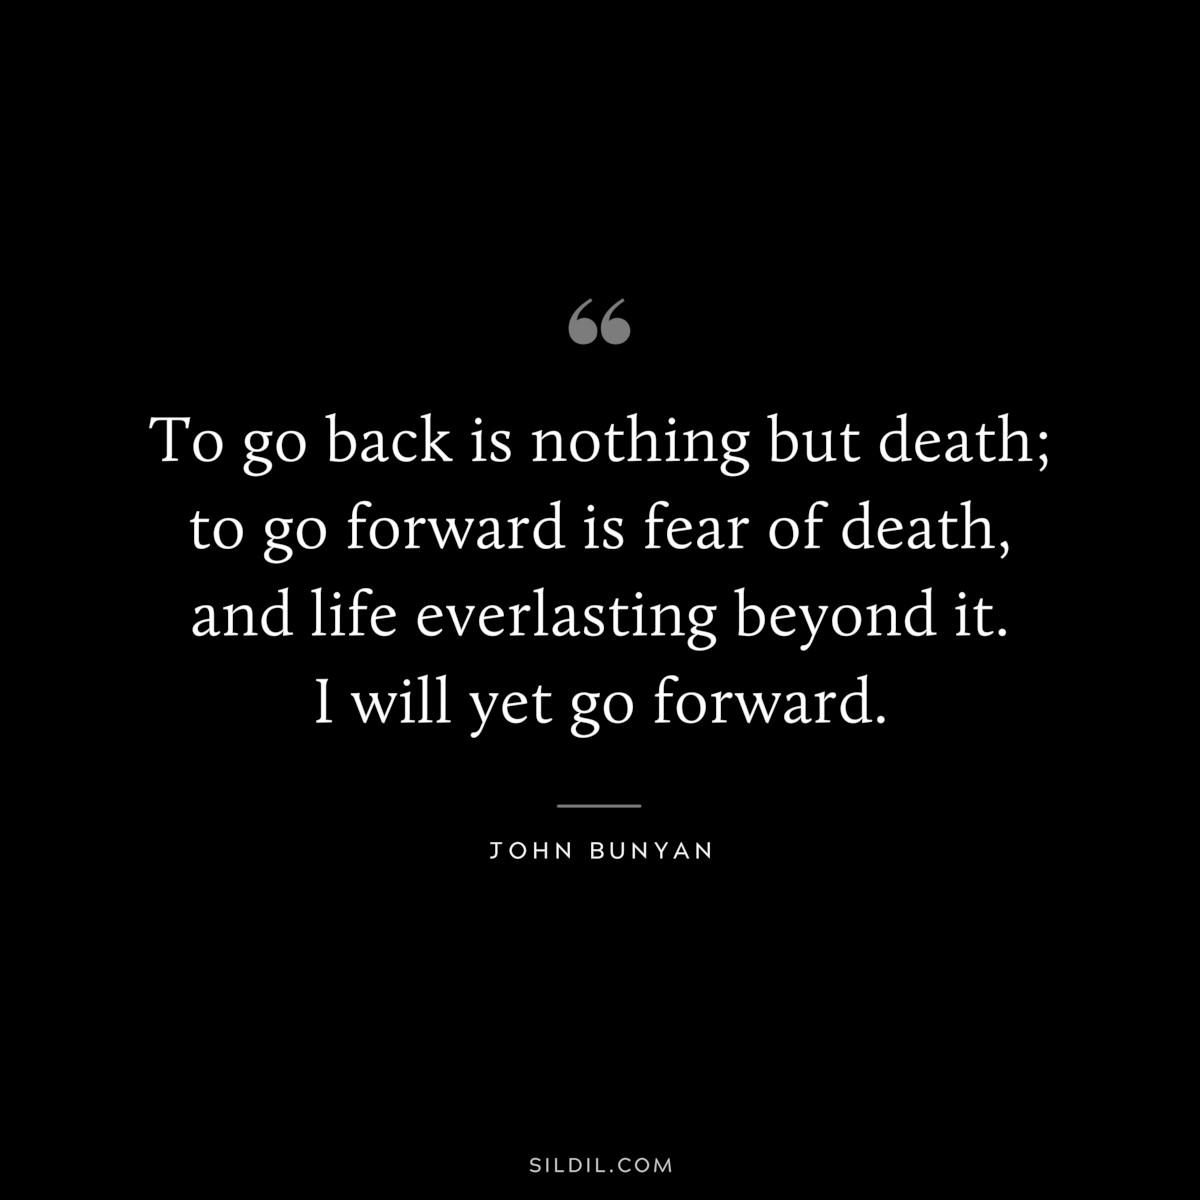 To go back is nothing but death; to go forward is fear of death, and life everlasting beyond it. I will yet go forward. ― John Bunyan